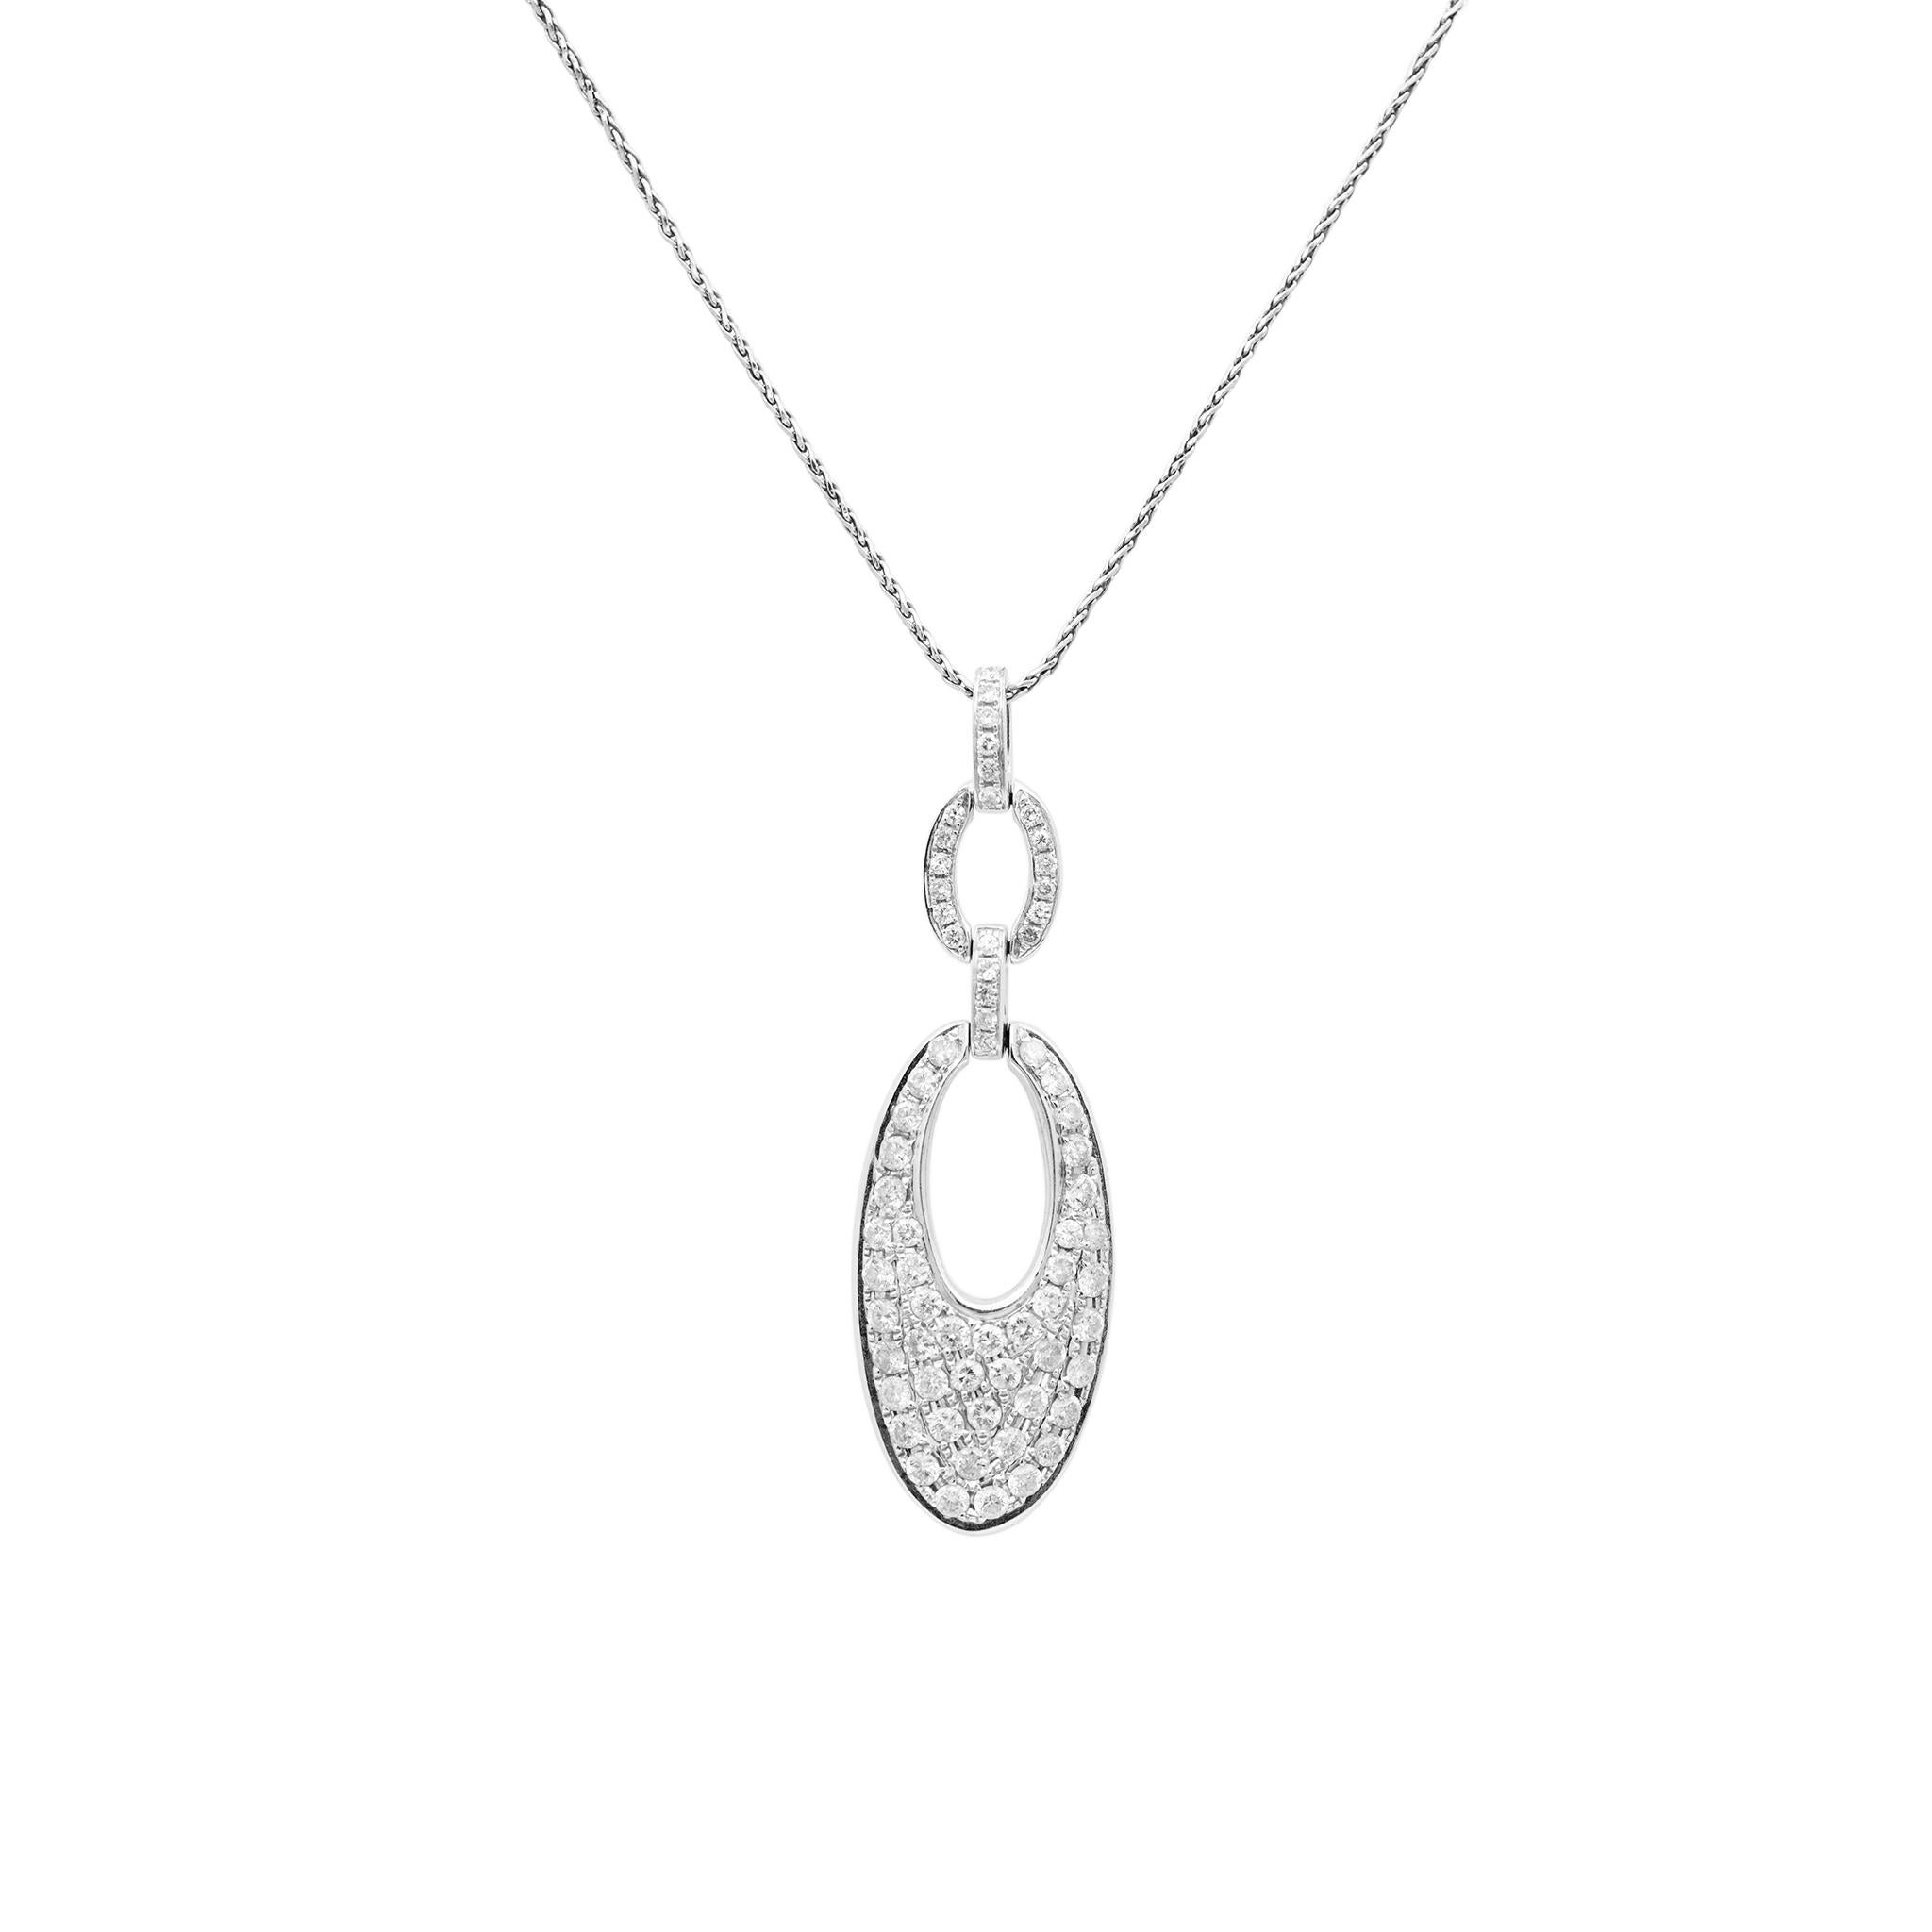 Gender: Ladies

Material: 14K White Gold

Chain Length: 18.00 inches

Pendant Length: 50.00mm

Pendant Width: 15.20mm

Weight: 6.90 grams

Ladies 14K white gold single strand collar diamond necklace.
Engraved with 